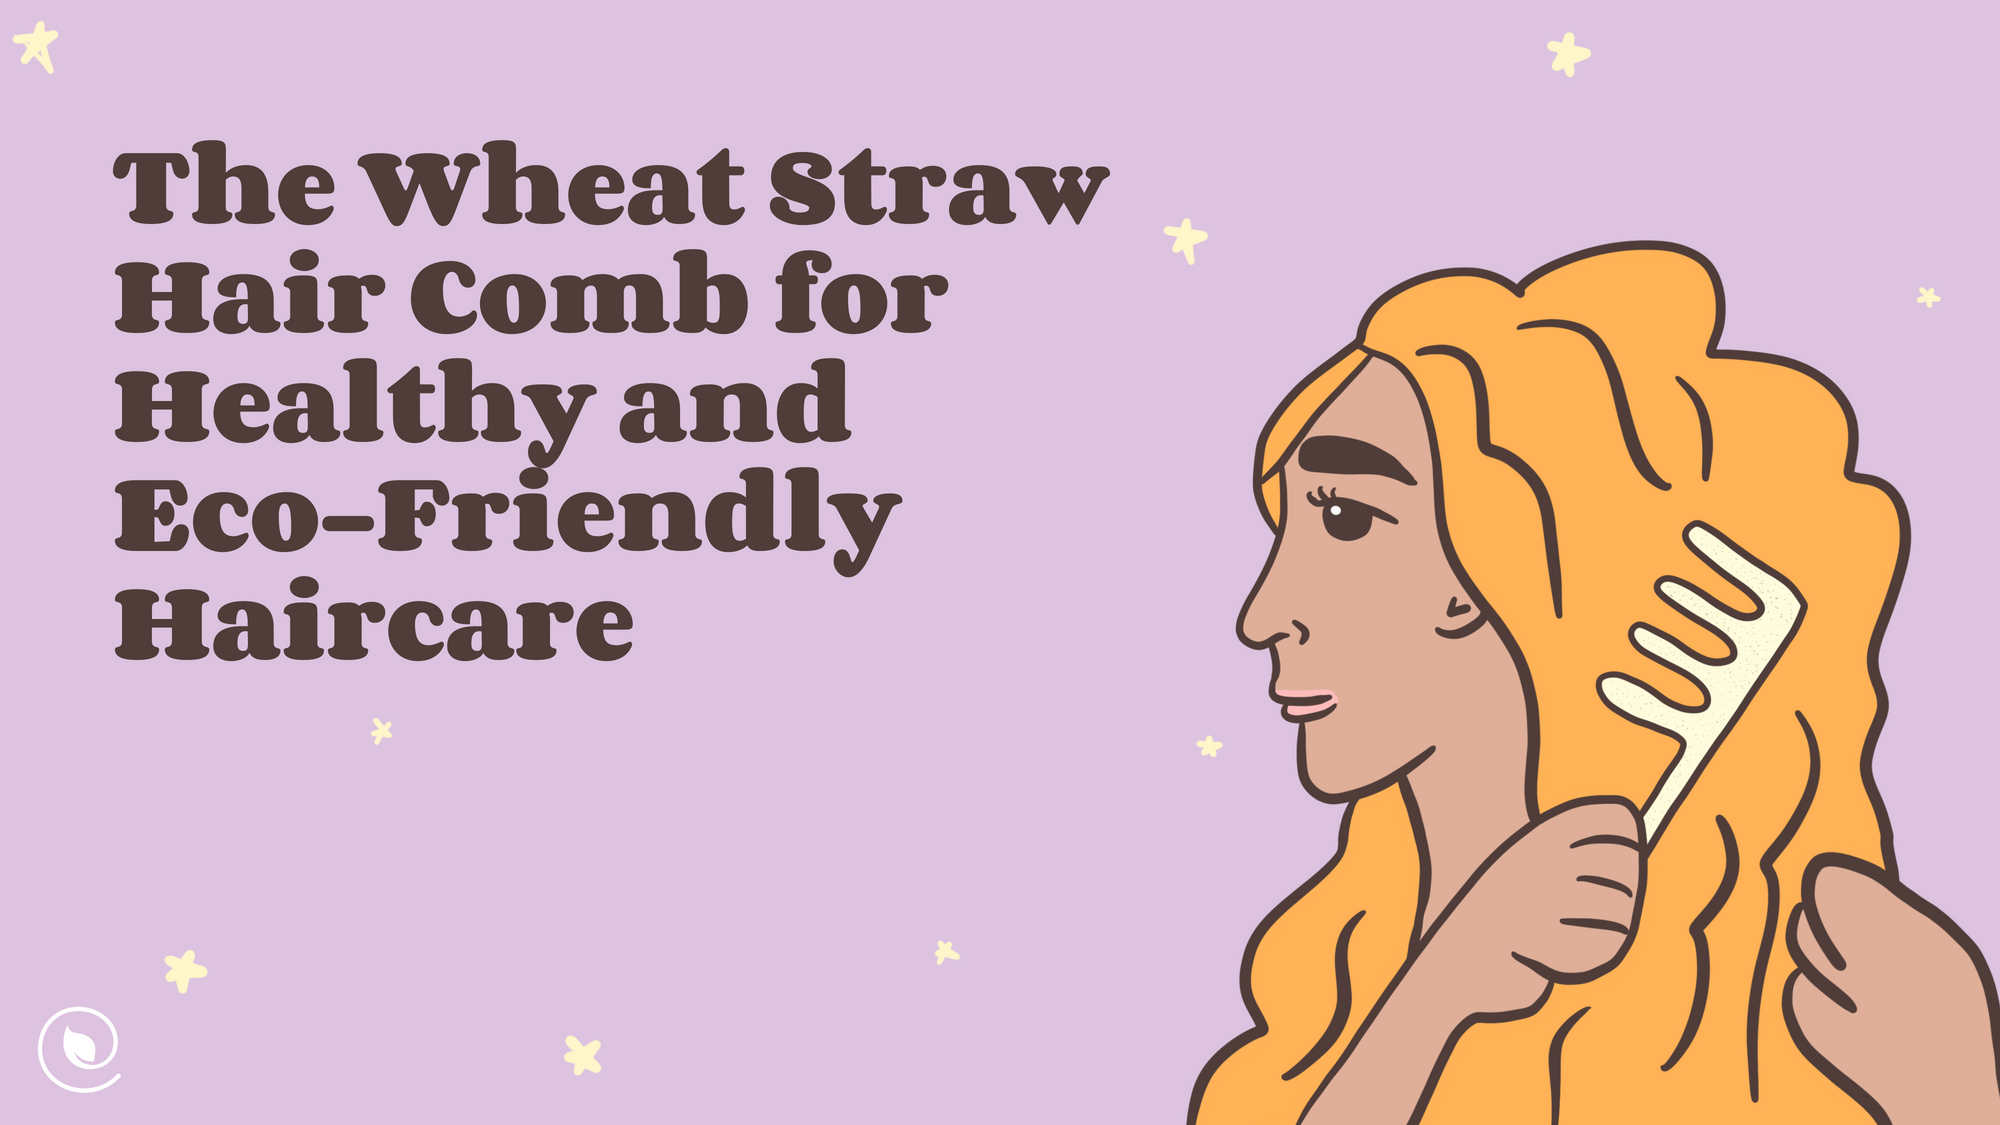 The Wheat Straw Hair Comb for Healthy and Eco-Friendly Haircare